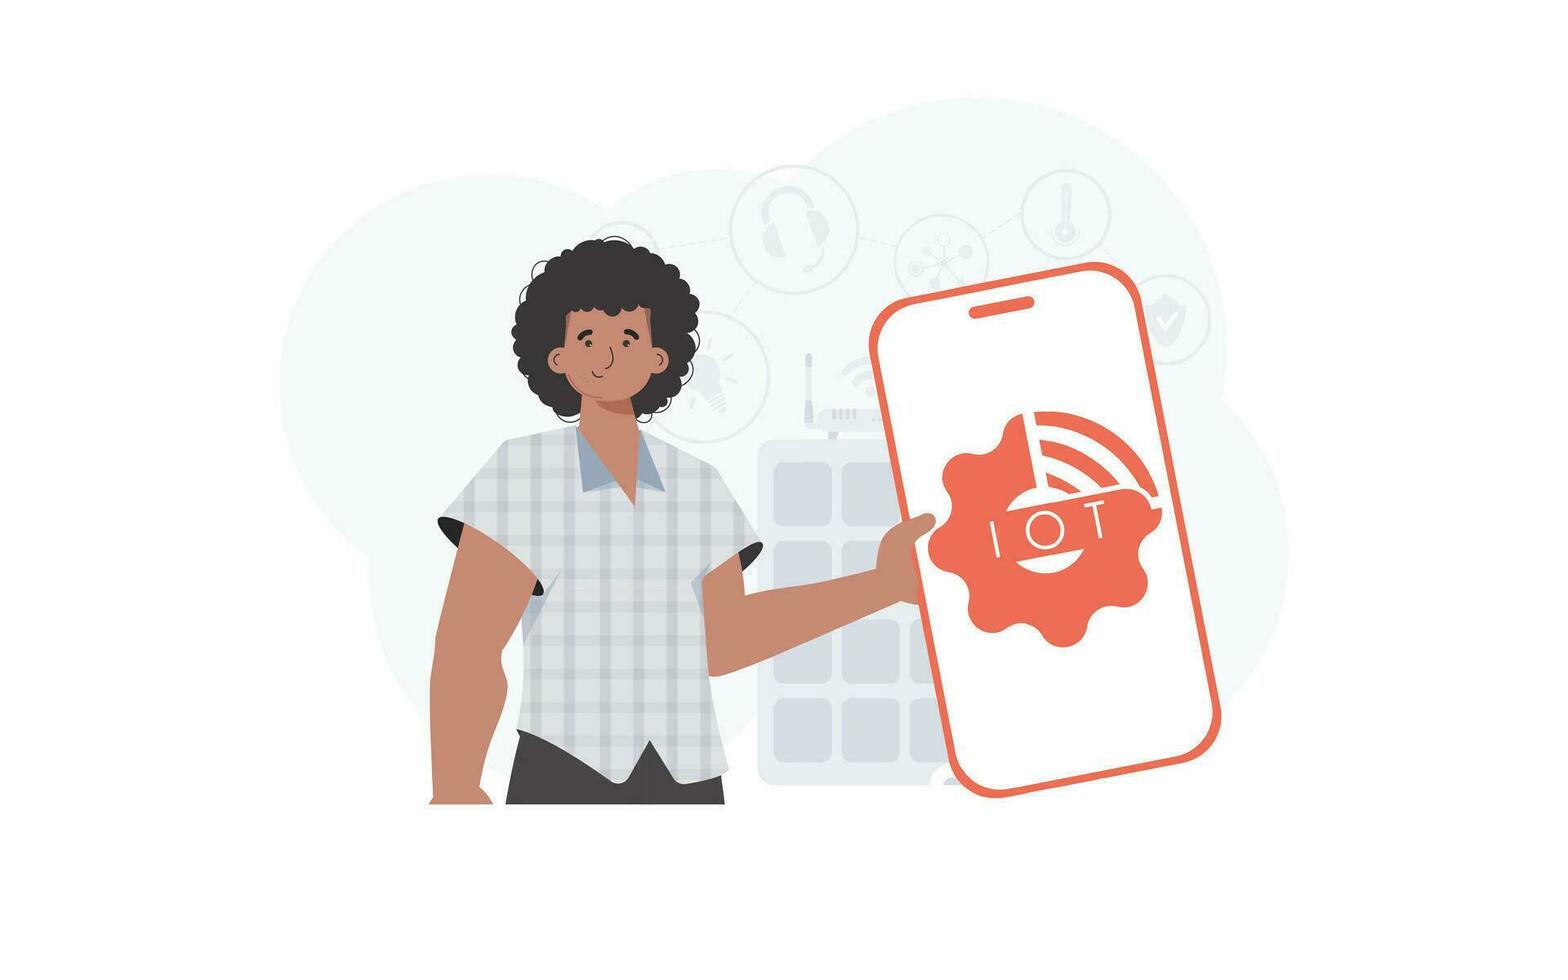 Internet of things and automation concept. A man holds a phone with the IoT logo in his hands. Vector illustration in flat style.